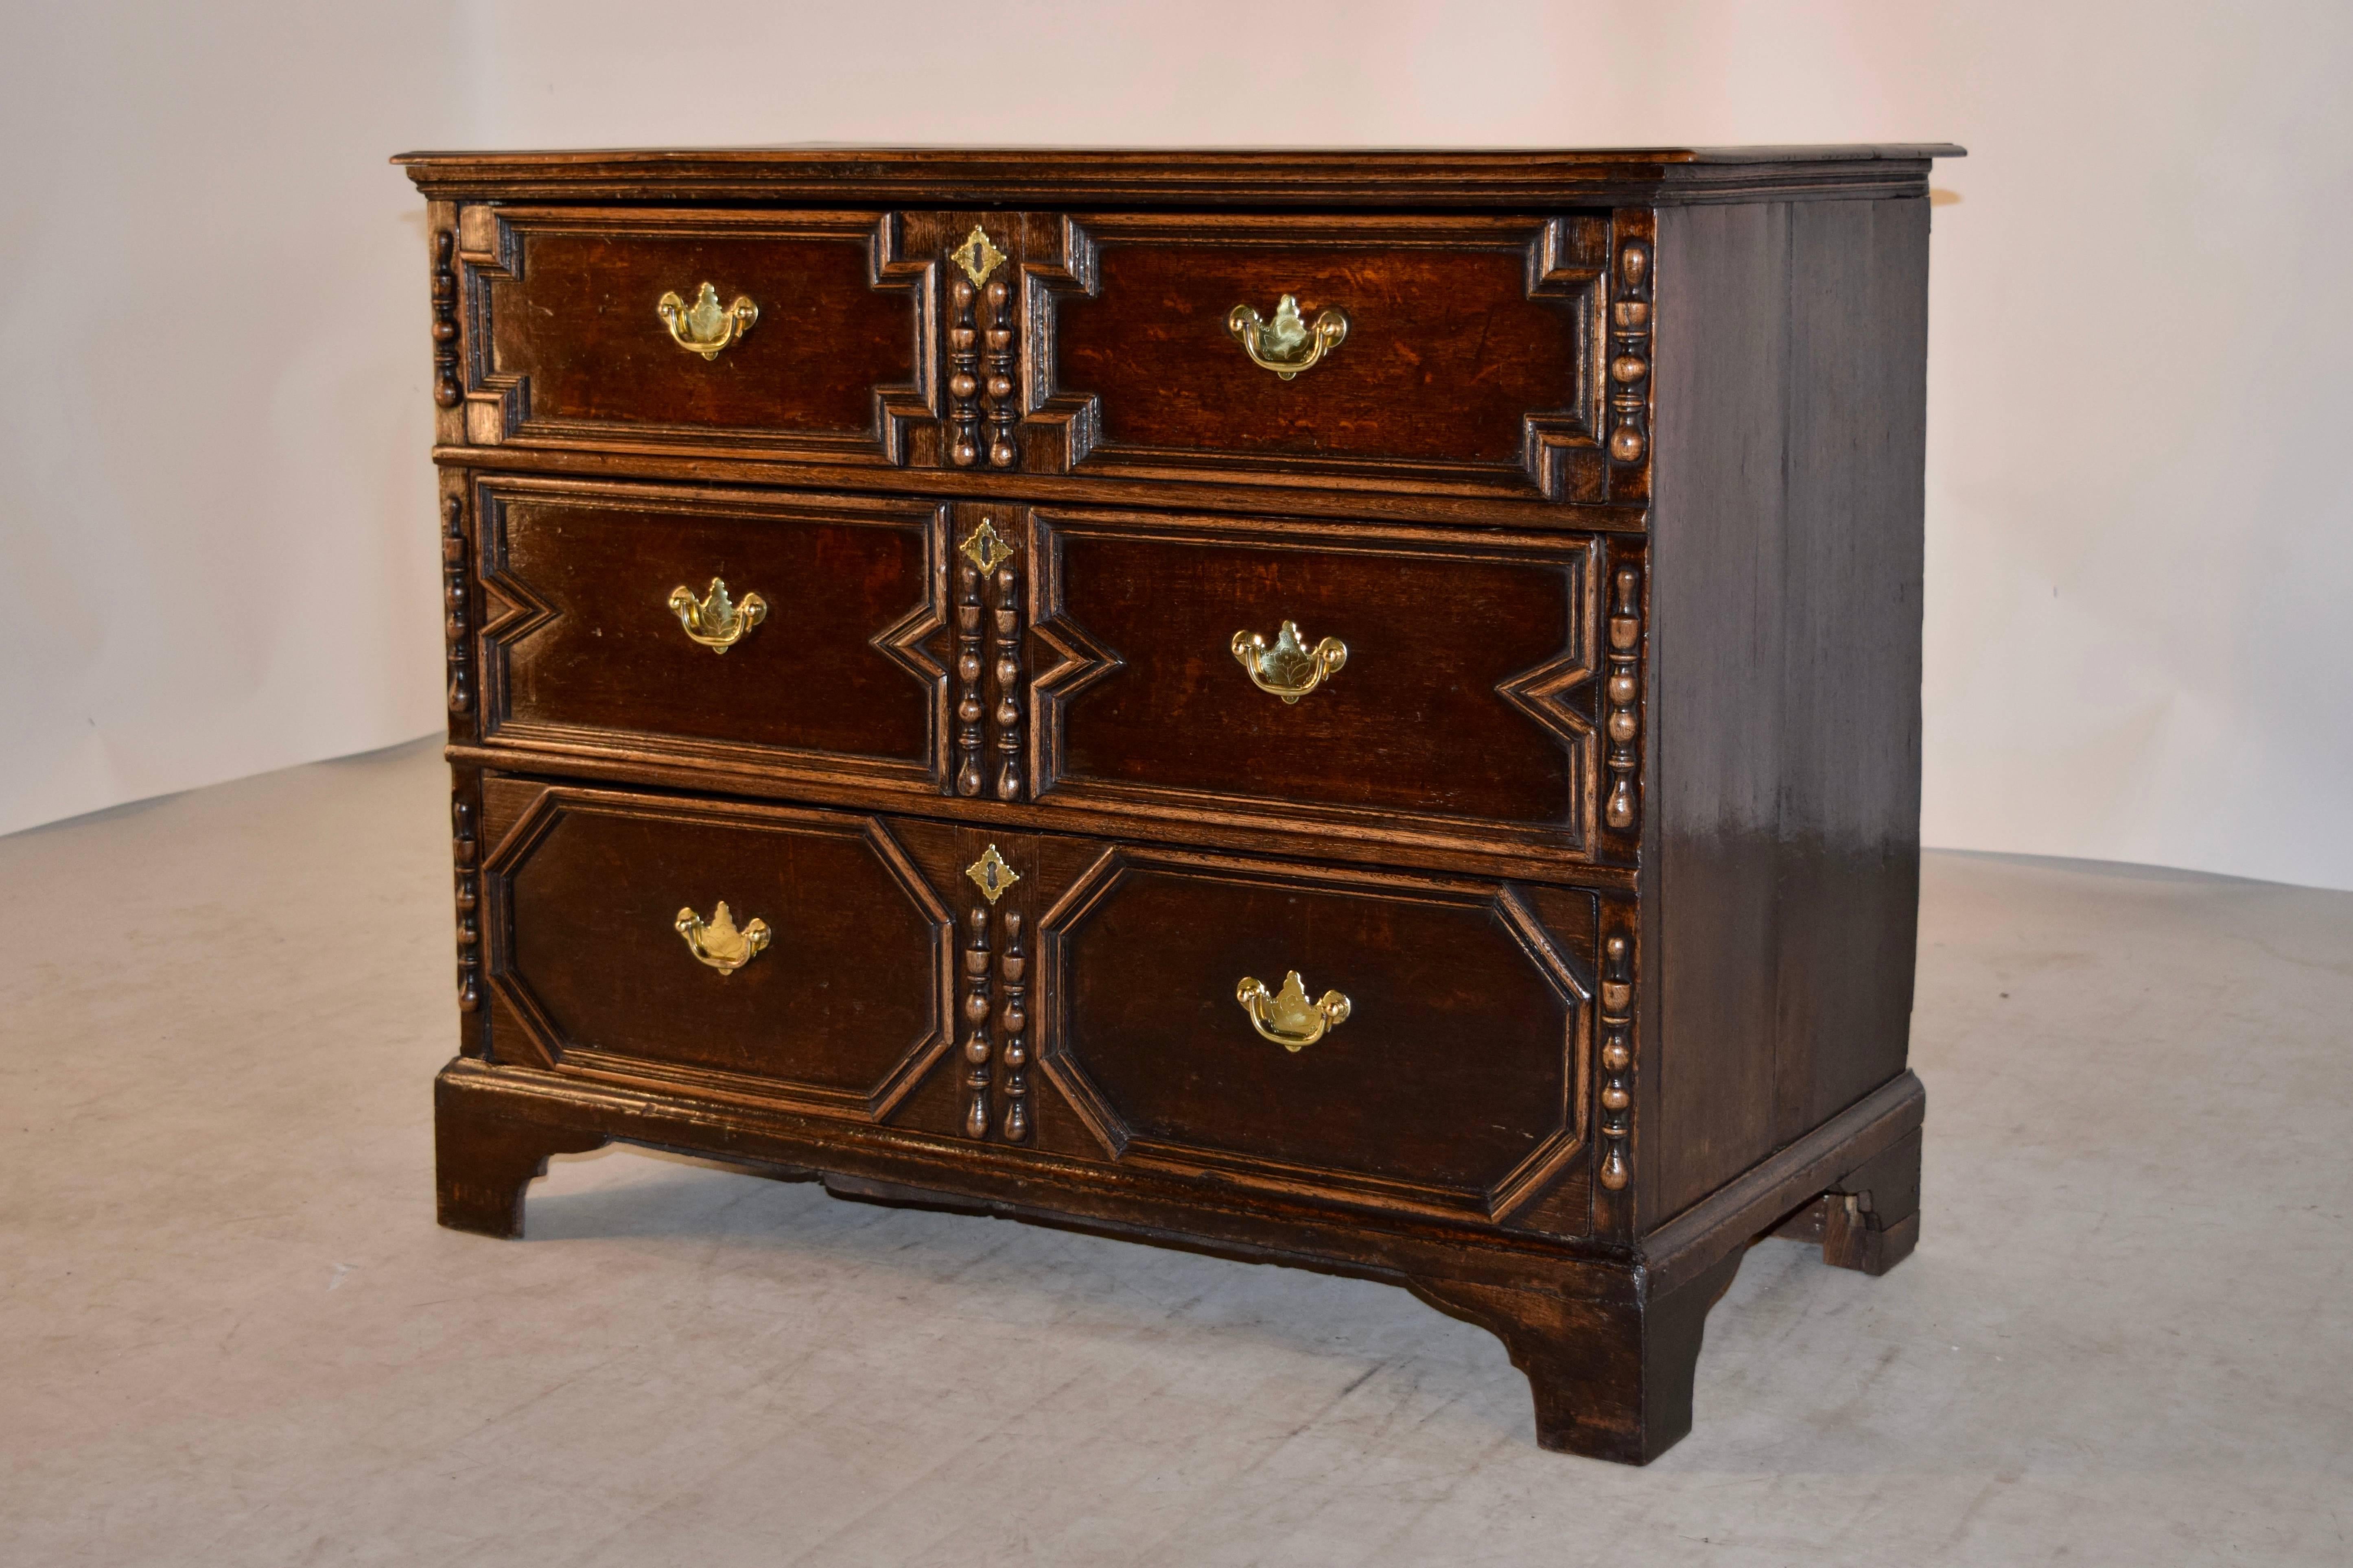 English oak chest of drawers with a two plank top which has a beveled edge, following down to a simple case with two plank sides and three drawers in the front, circa 1720. The drawers have applied molding in geometric patterns and split molded